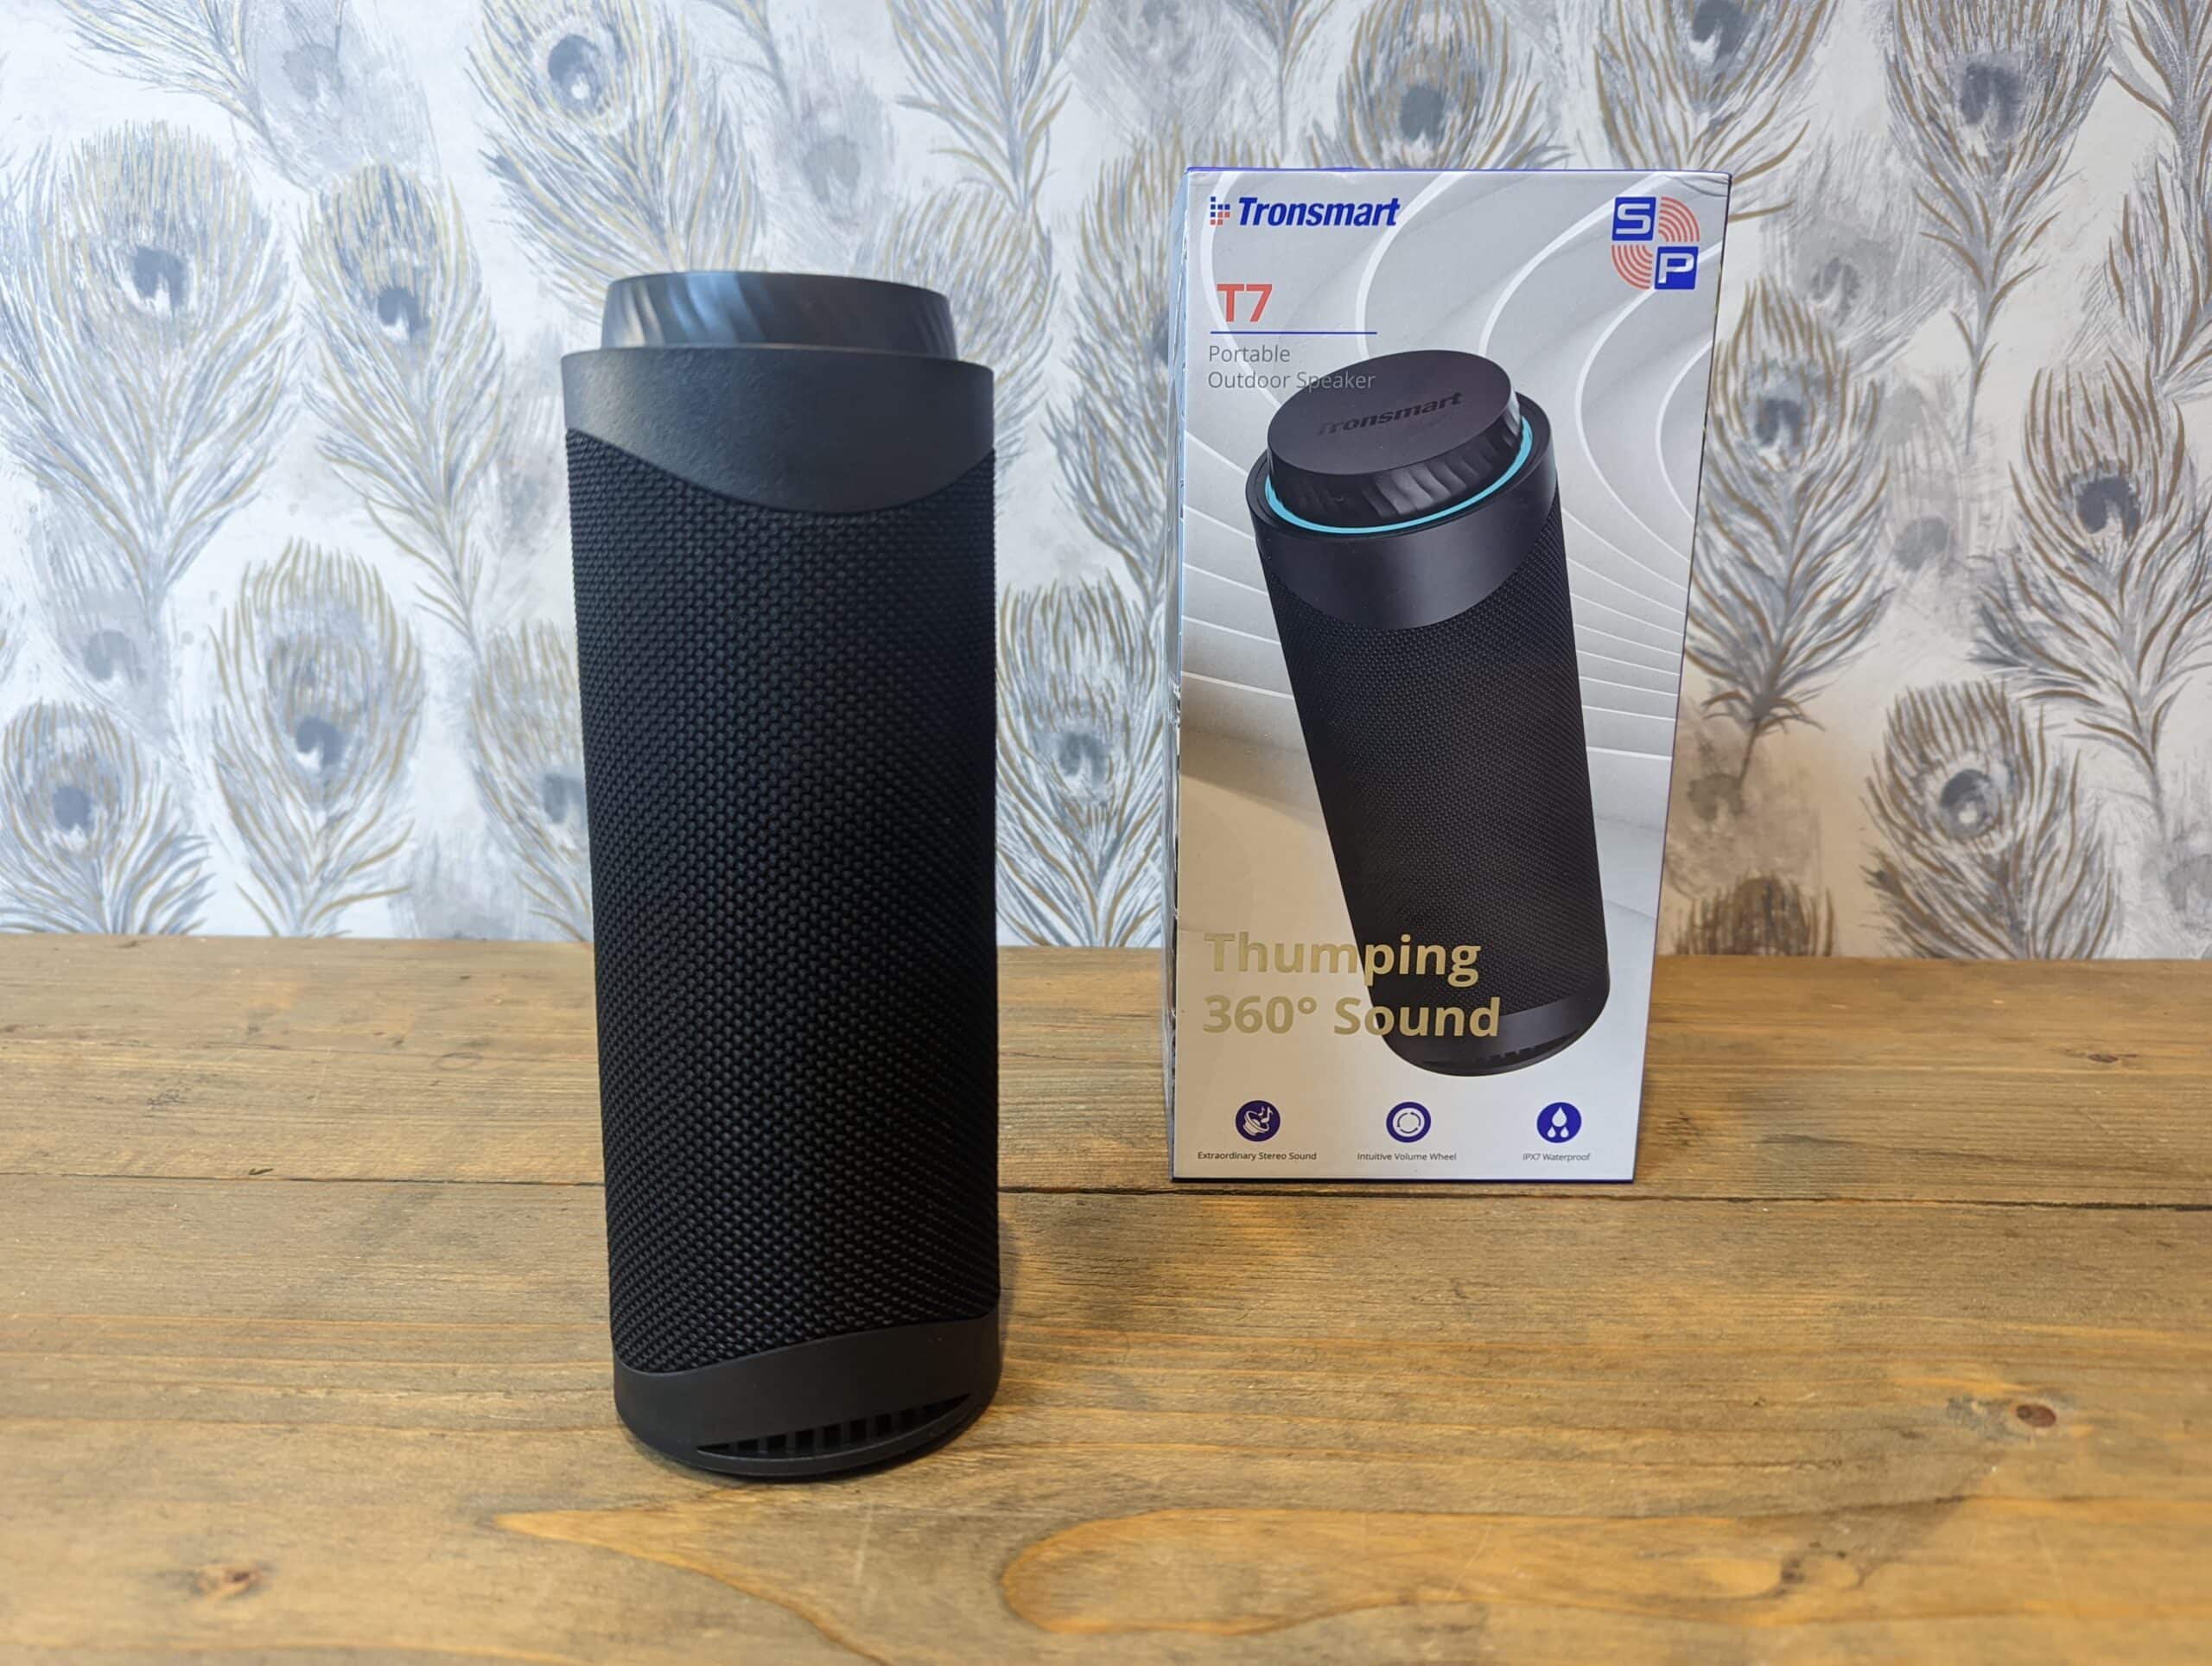 Tronsmart T7 Portable Outdoor Bluetooth Speaker Competition